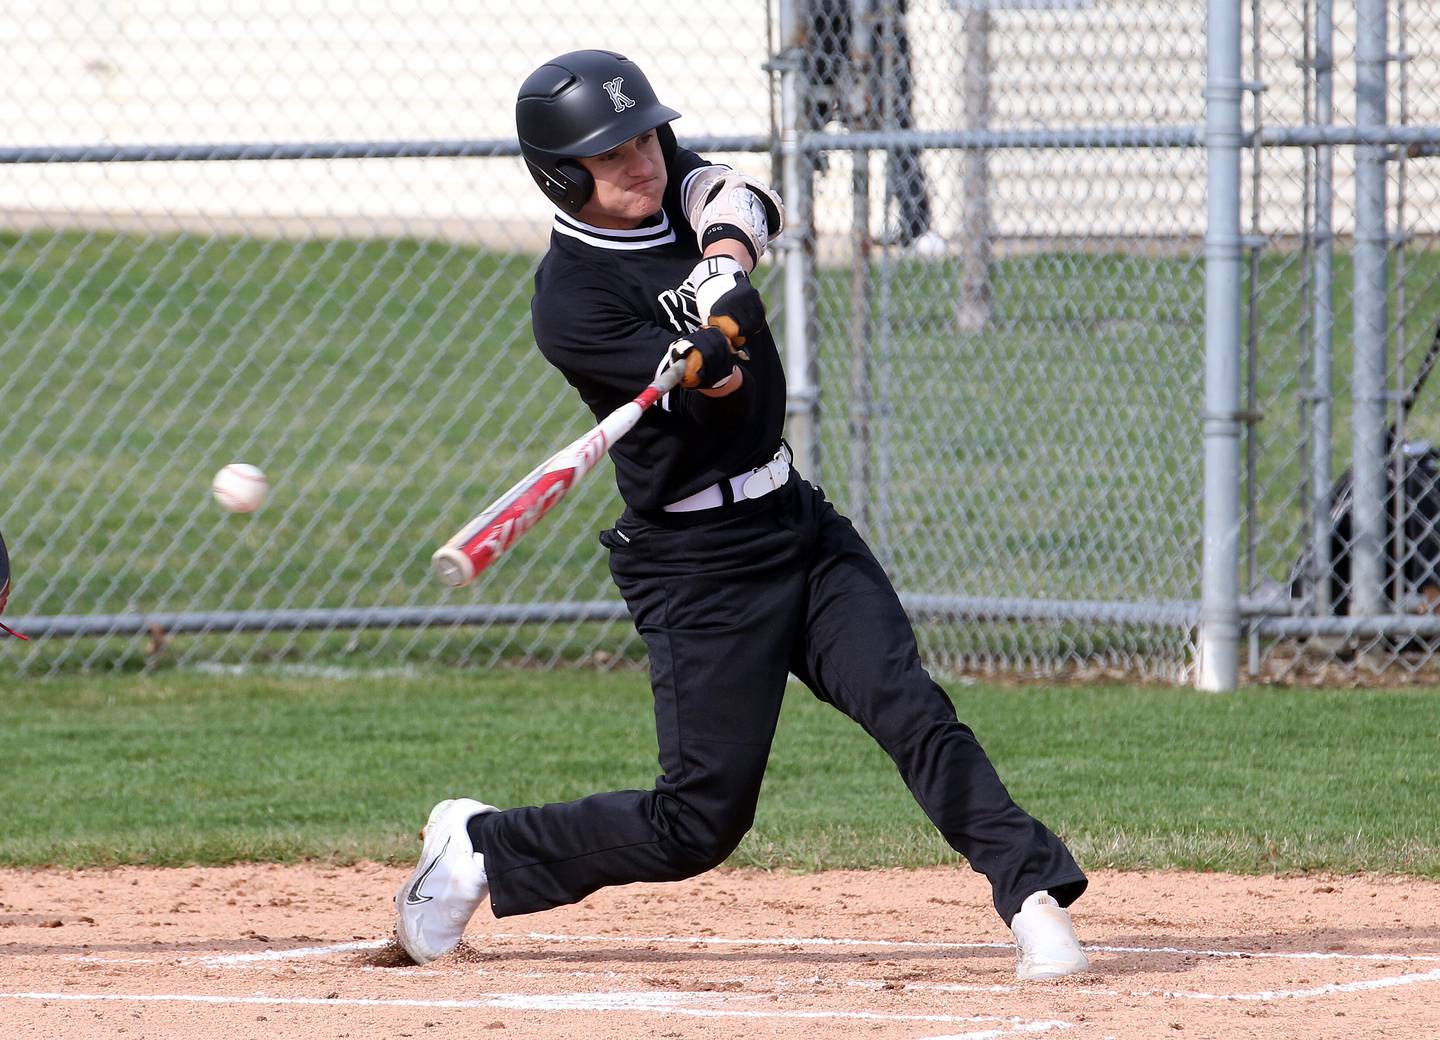 Kaneland's Alex Panico swings and misses at a pitch against L-P on Wednesday, April 5, 2023 at Dickinson Park in Oglesby.